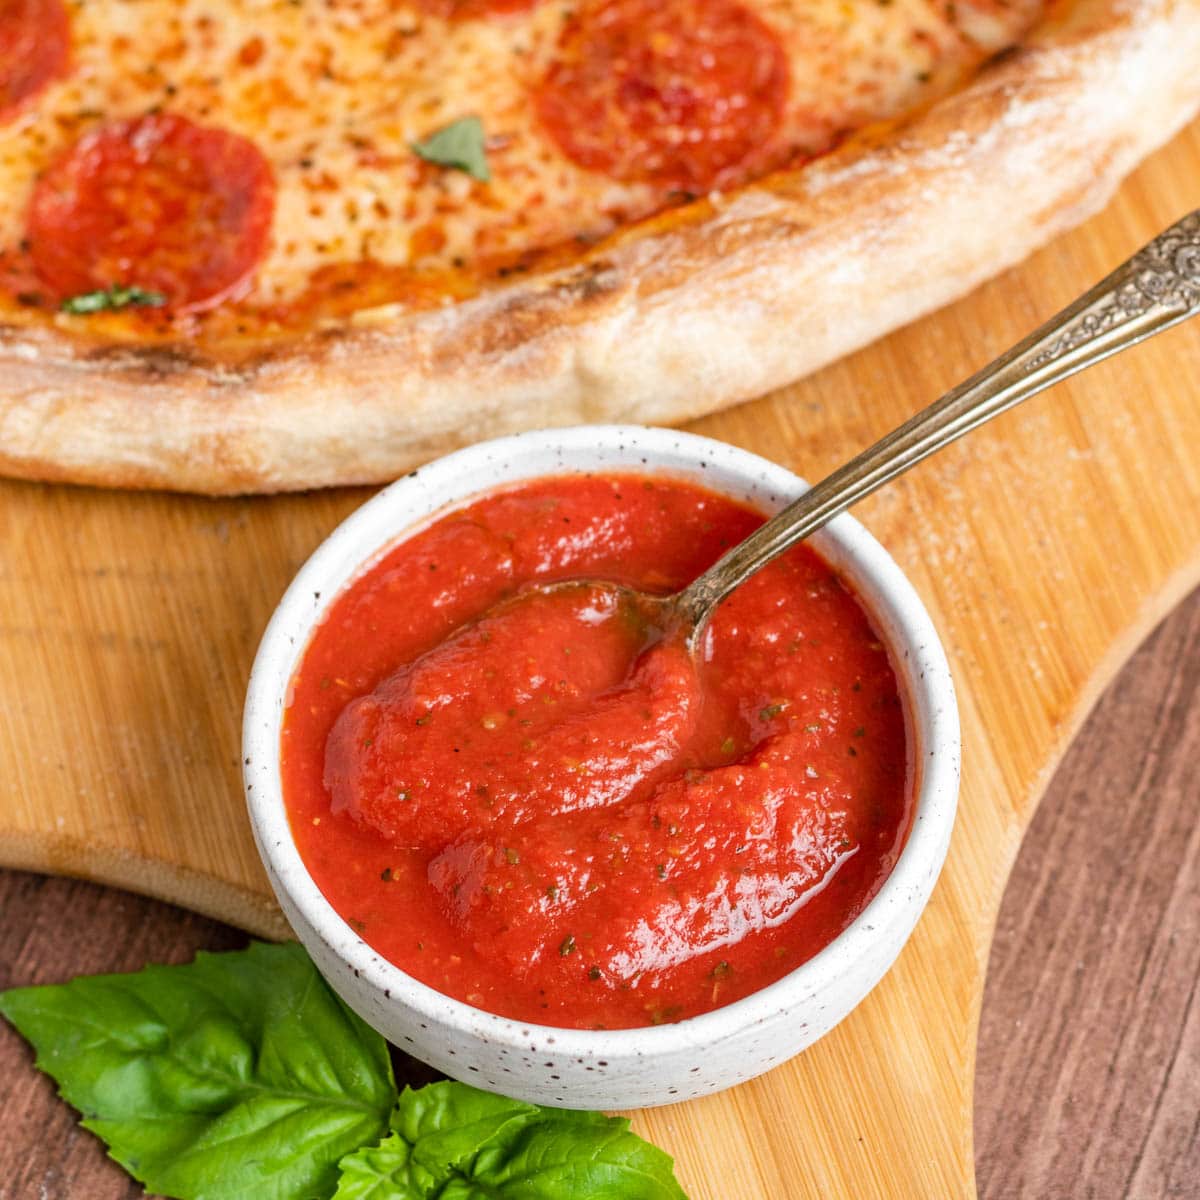 no-cook-red-pizza-sauce-1x1-0545 (1).jpg